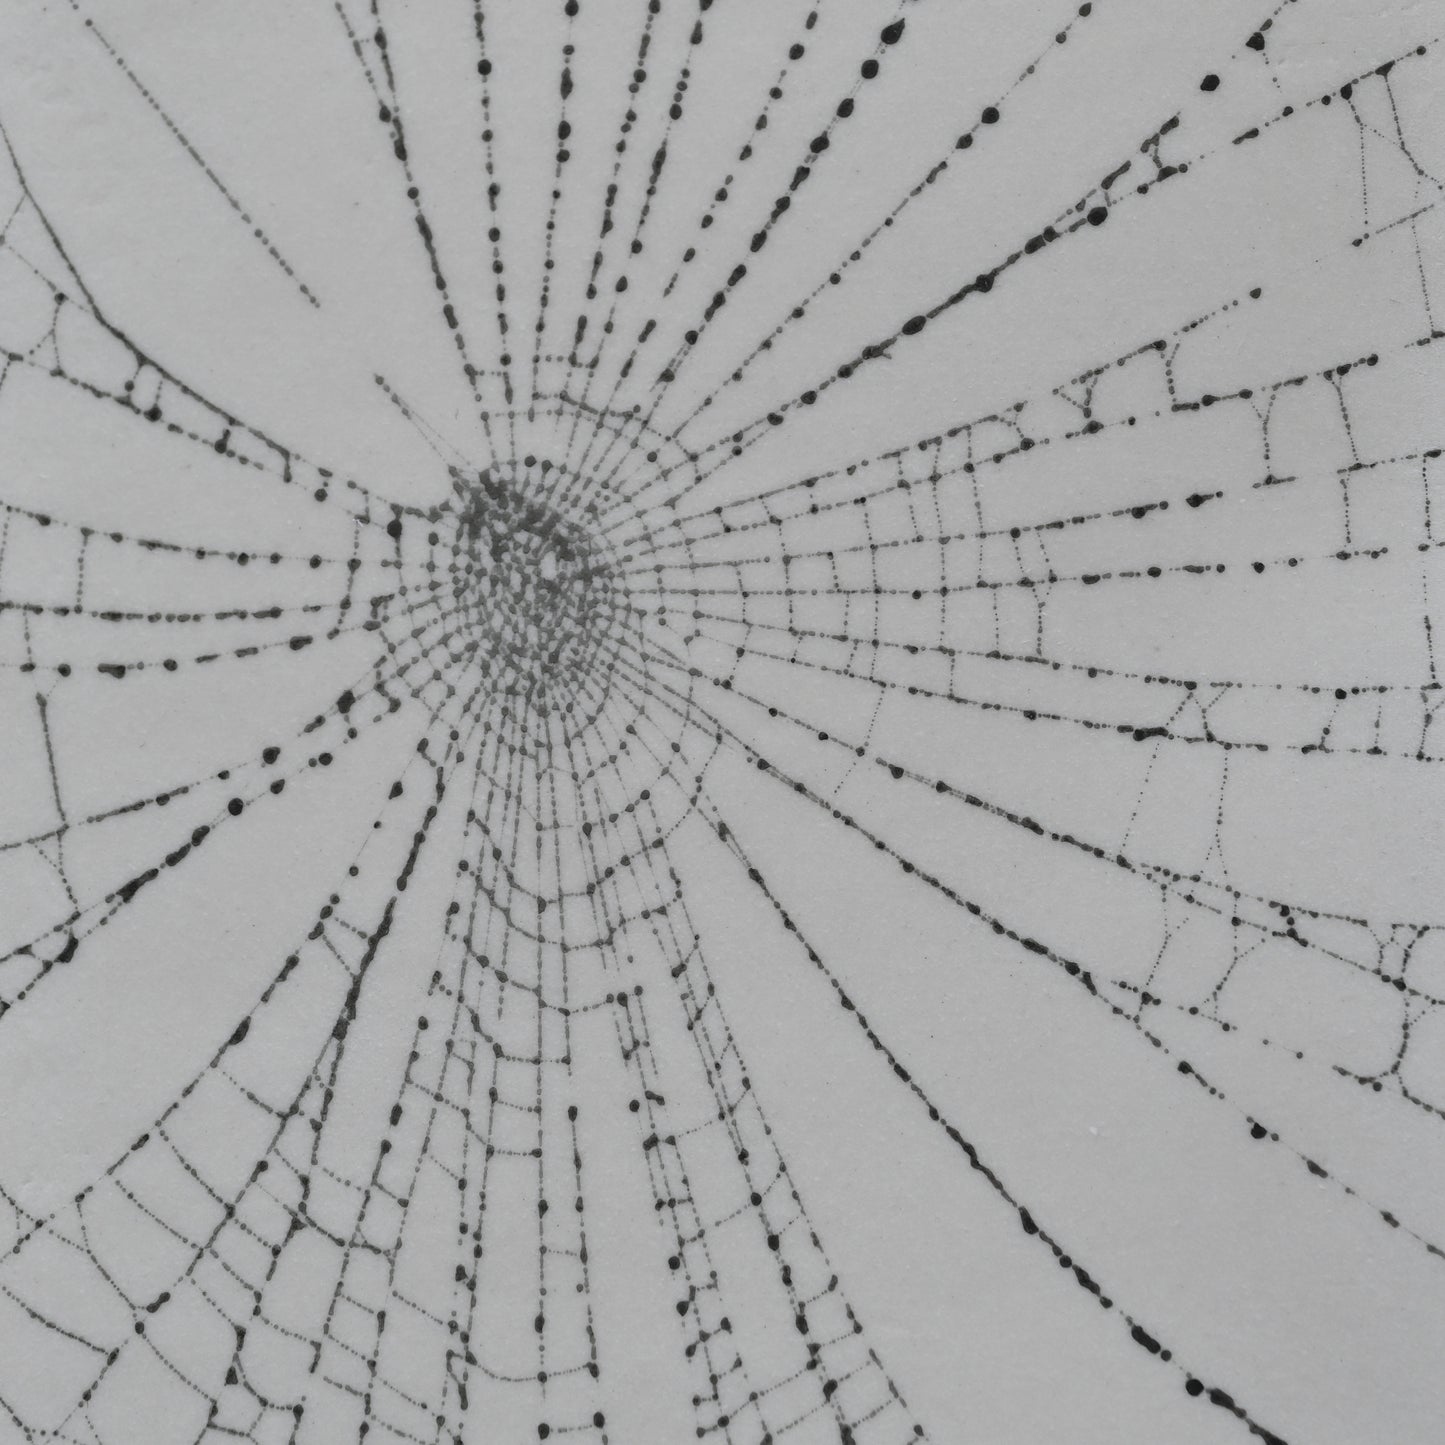 Web on Clay (134), Collected September 01, 2022